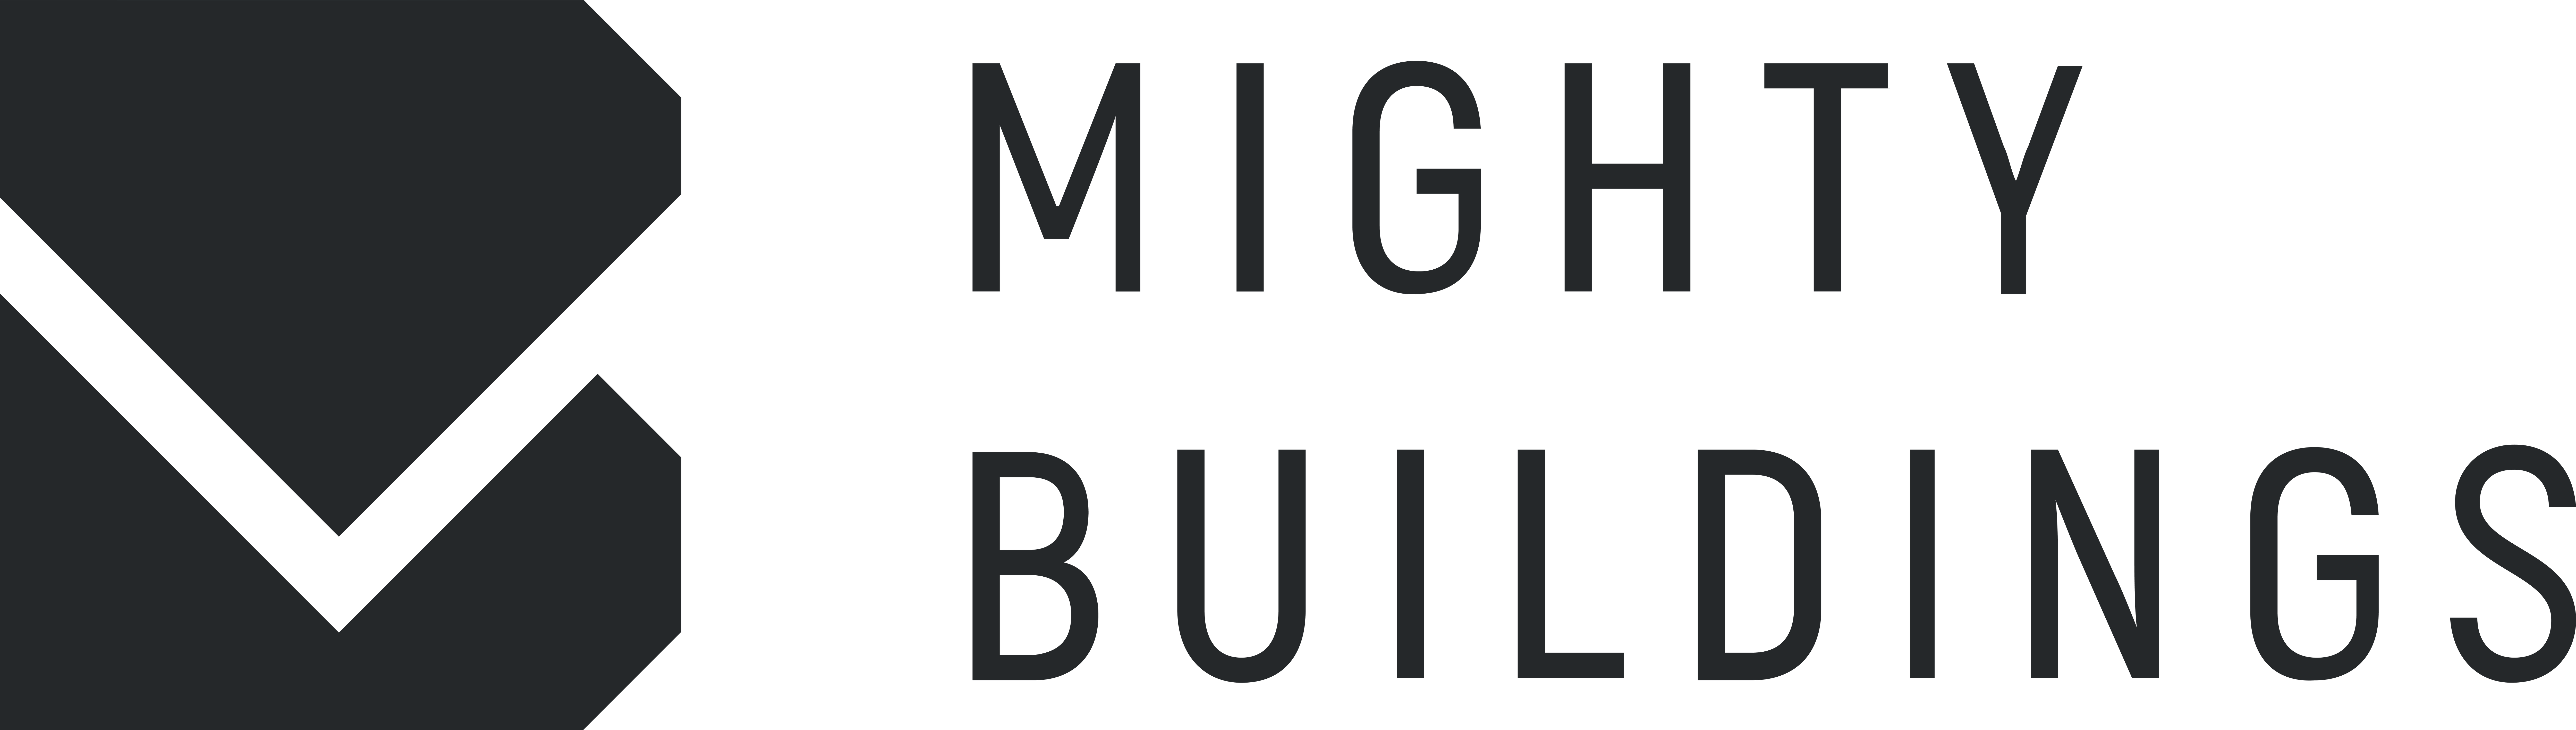 mighty-buildings-logo.png